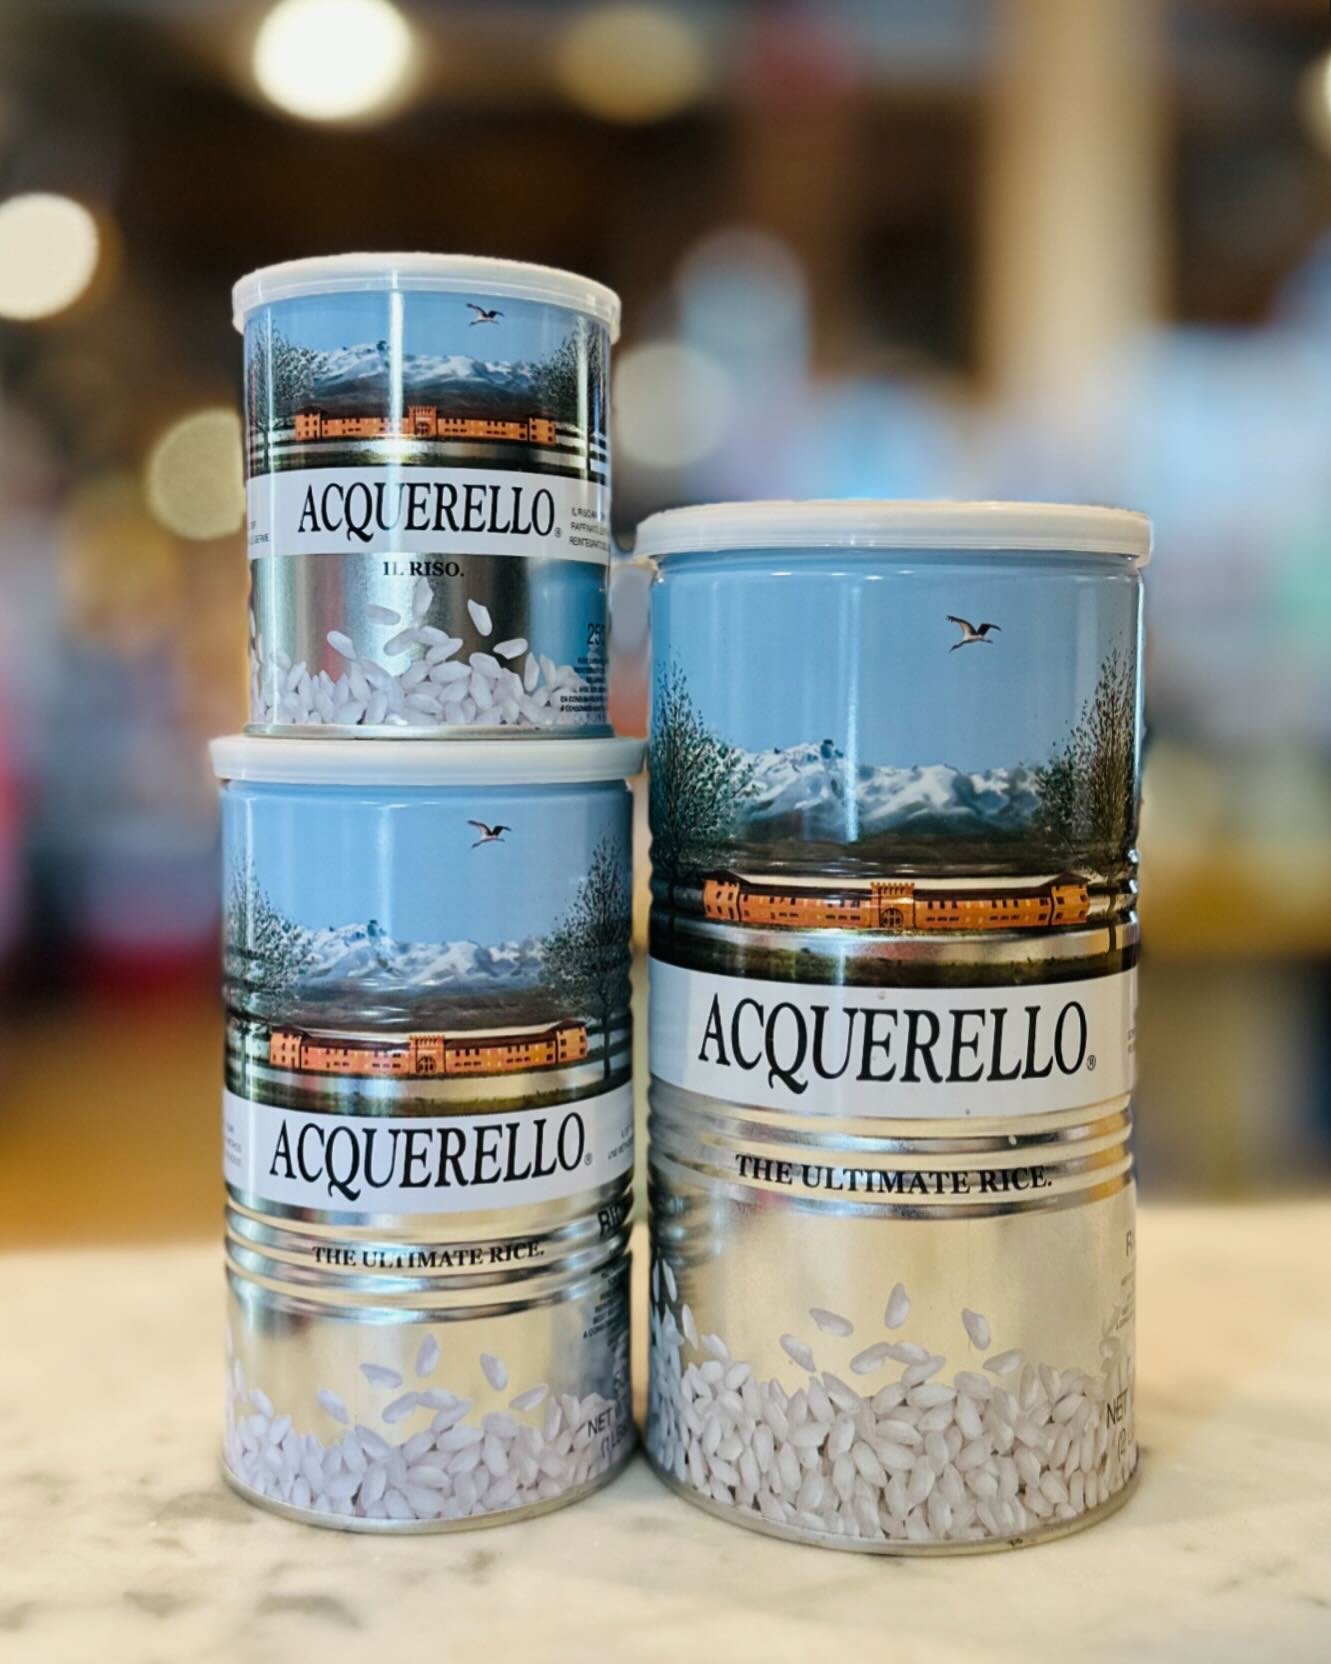 ✨What&rsquo;s for dinner tonight? It seems like a great night for risotto!

This aged Carnaroli rice from @risoacquerello is one of our favourites&mdash;rich, flavourful, and impeccably produced. 

Pick up a tin, along with some of our house-made sto